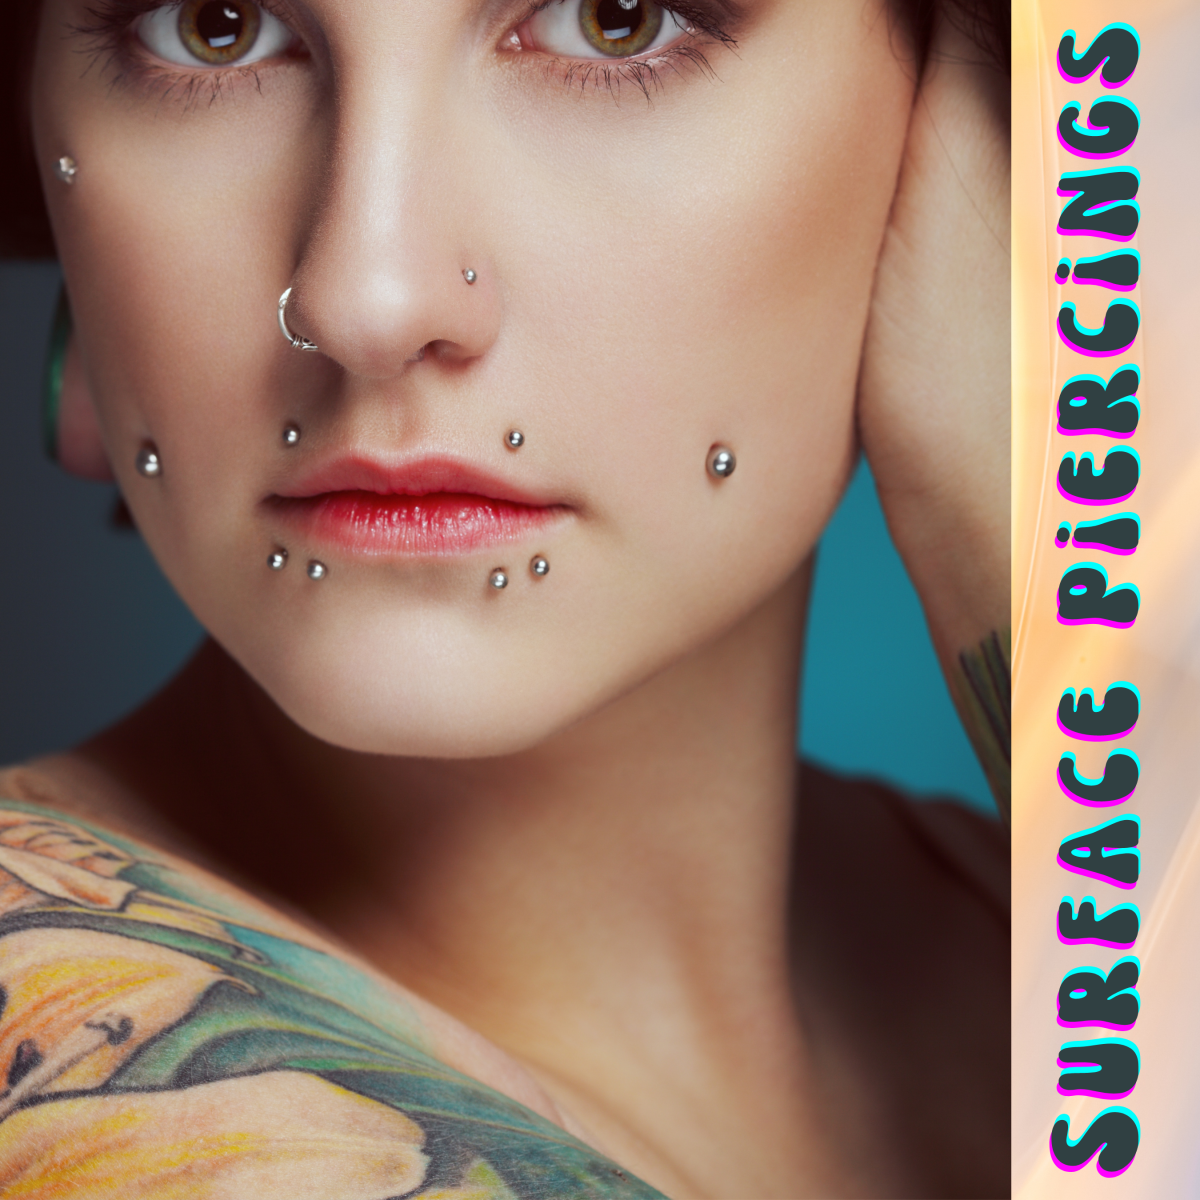 Extreme Body Mod Surface Piercings Tatring